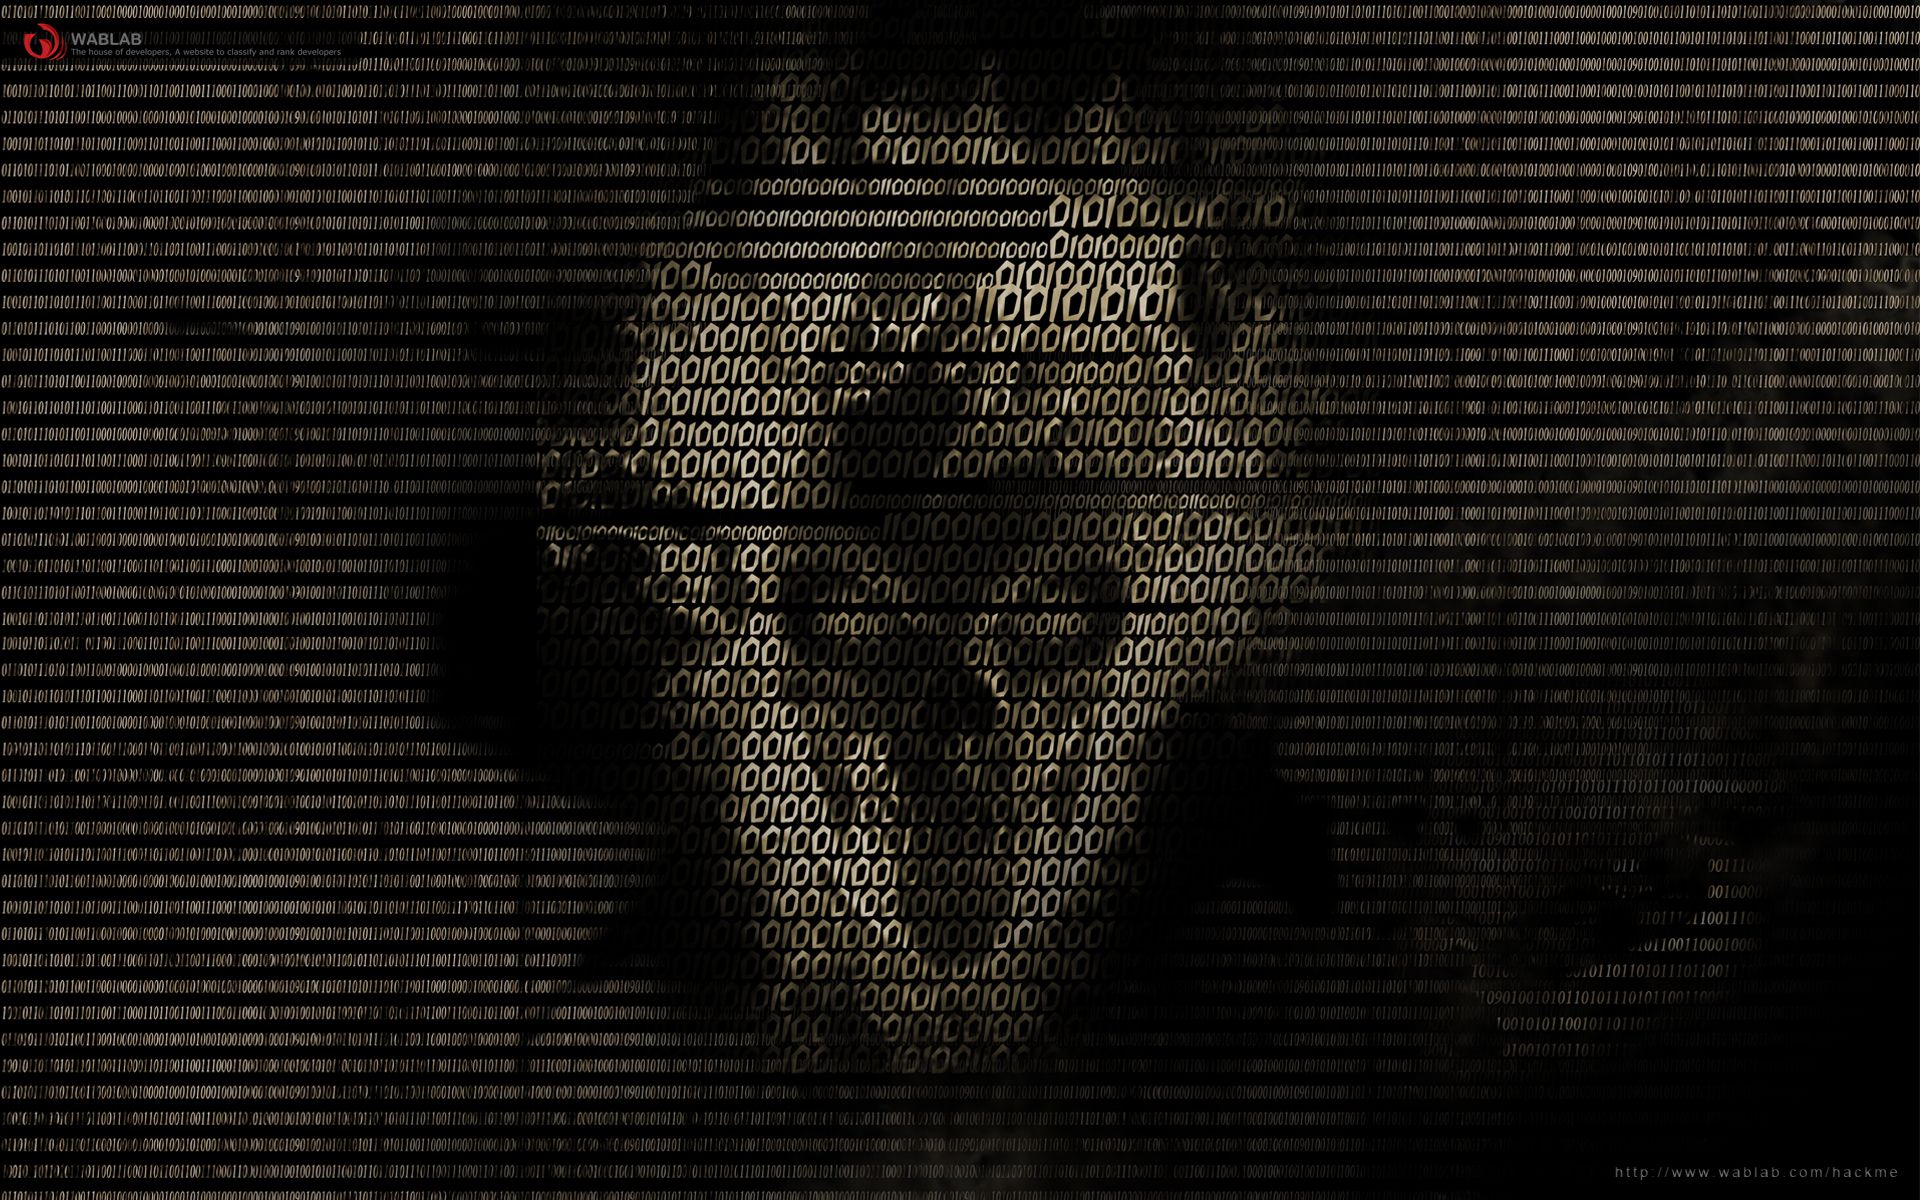 Hackers Wallpapers 2.01 Mb - 4USkY